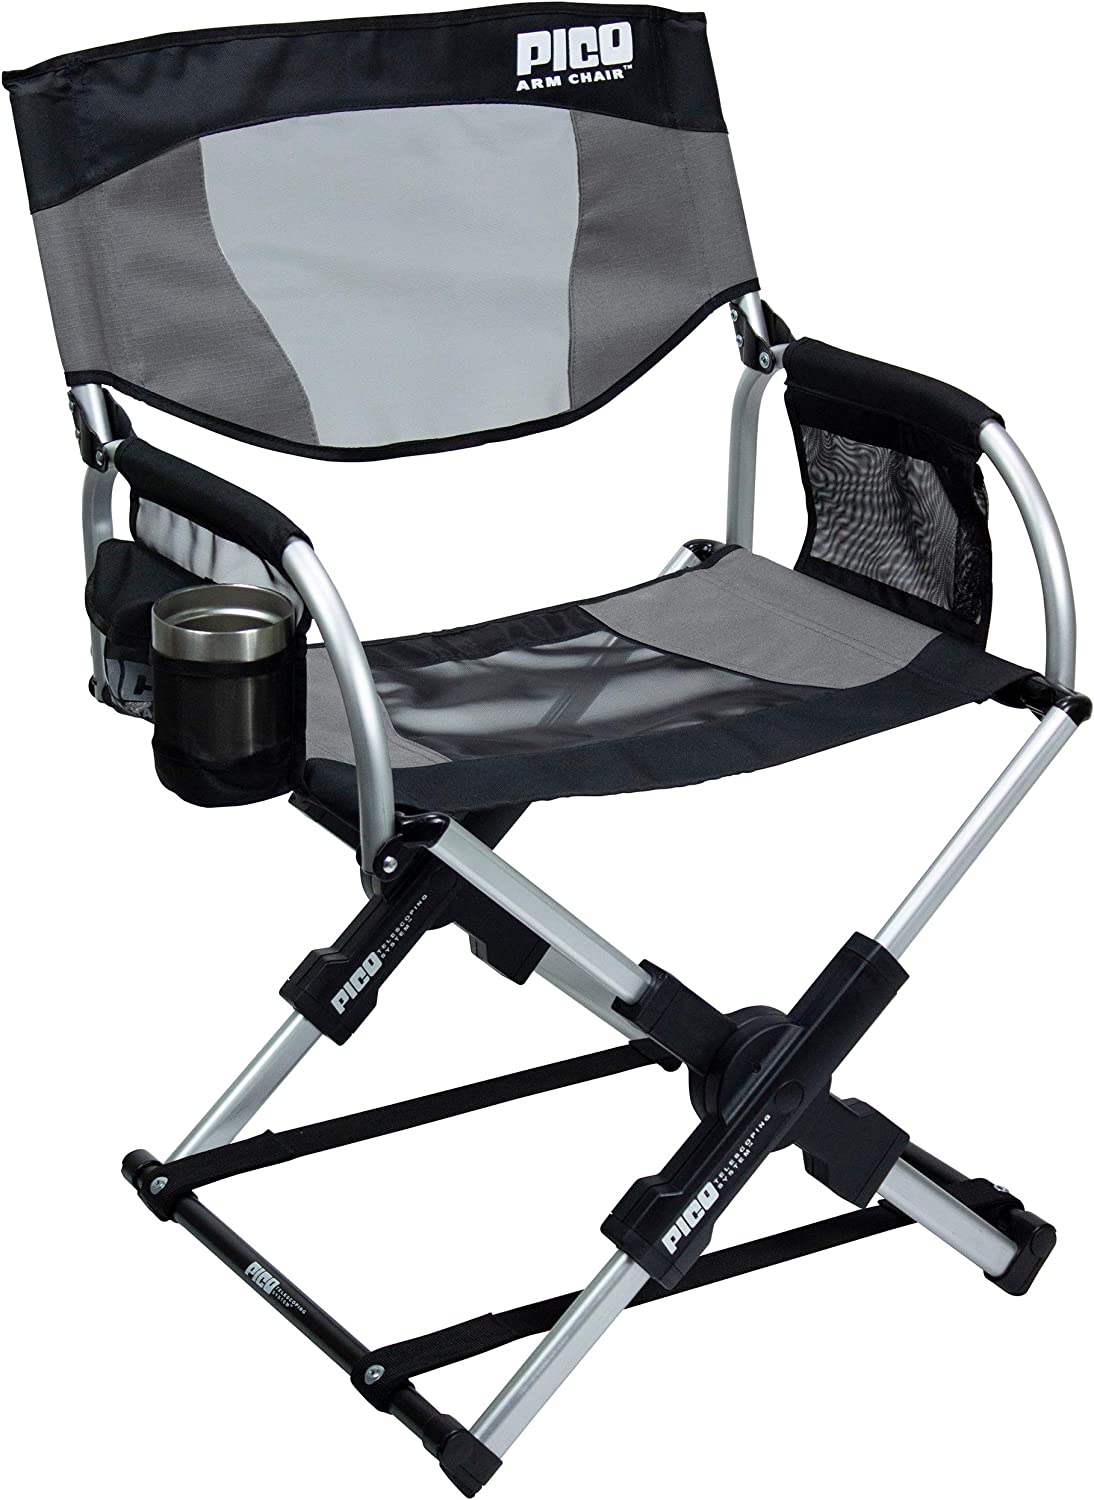 GCI Outdoor Pico Chair - Best Fishing Chair